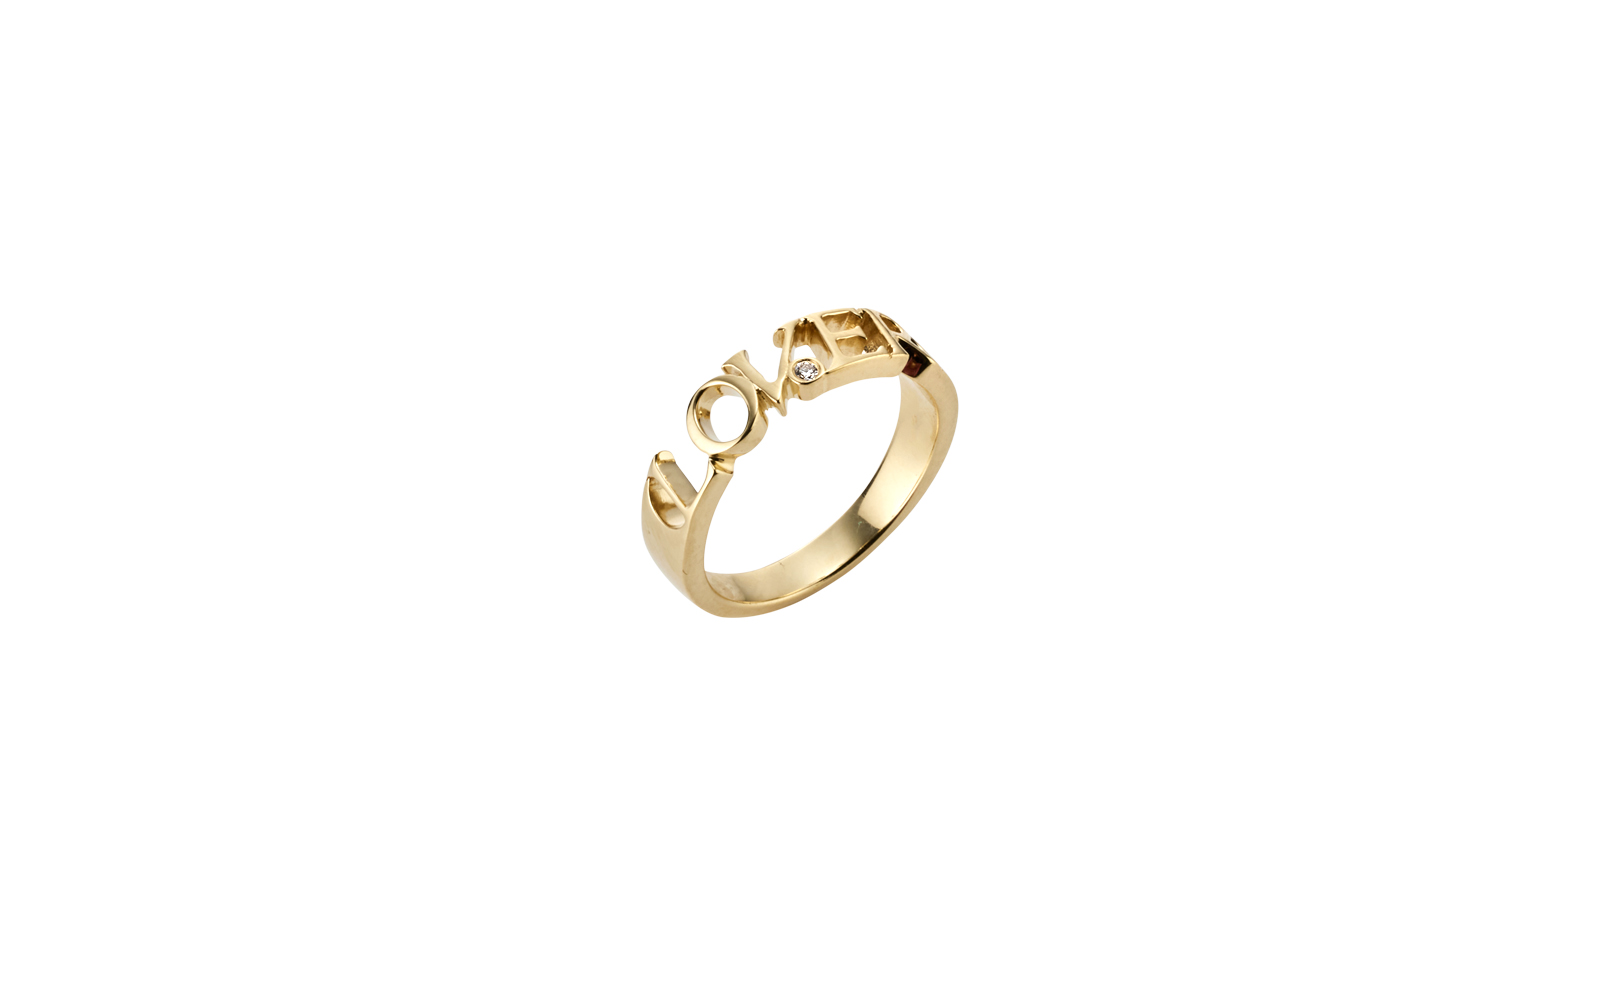 Lover Ring with Diamond Small 14k Yellow Gold